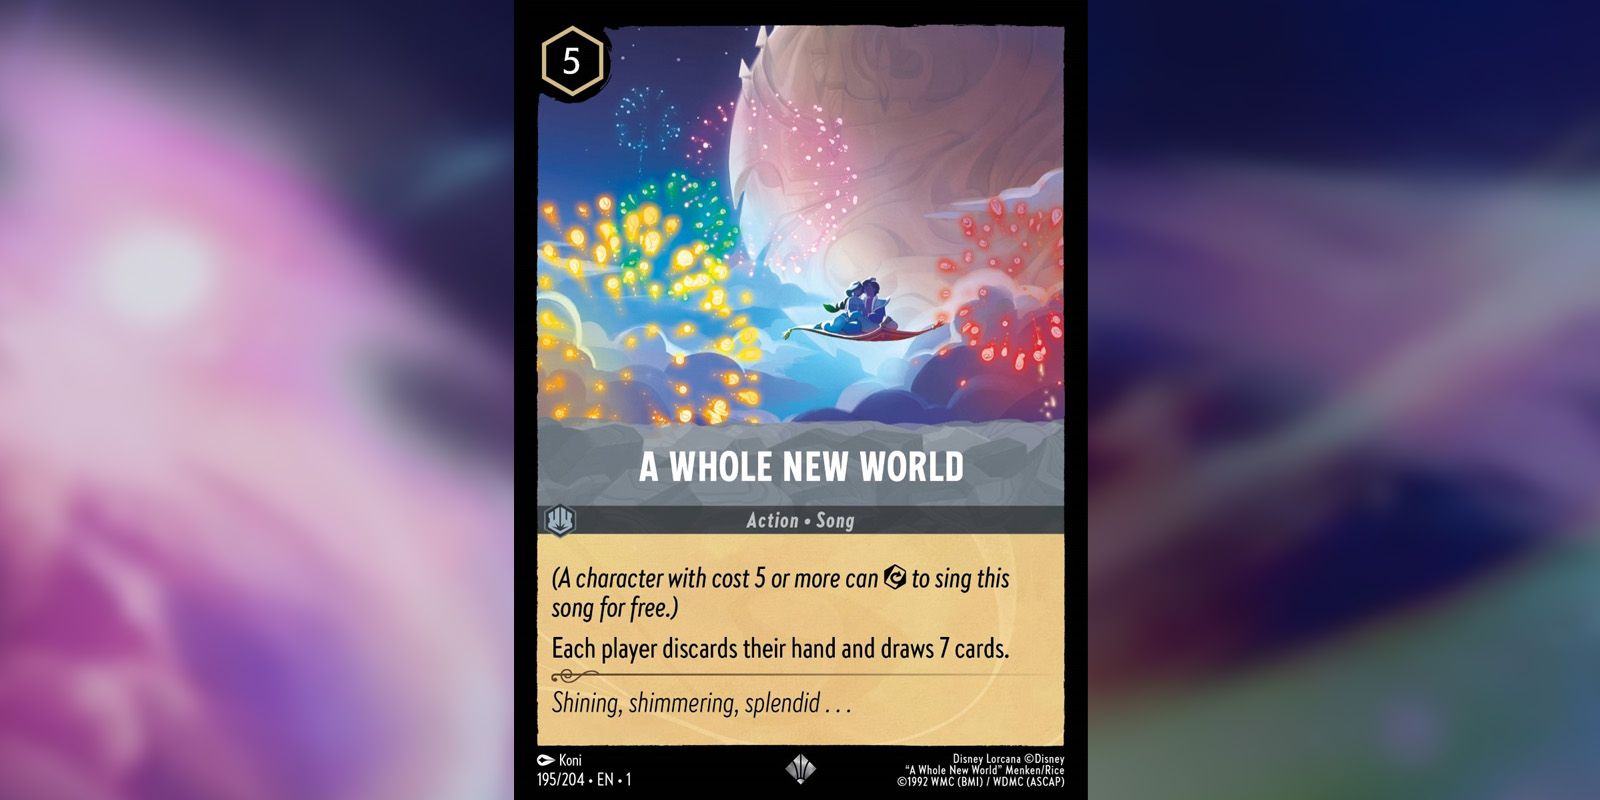 A Whole New World Lorcana song card showing the magic carpet ride.